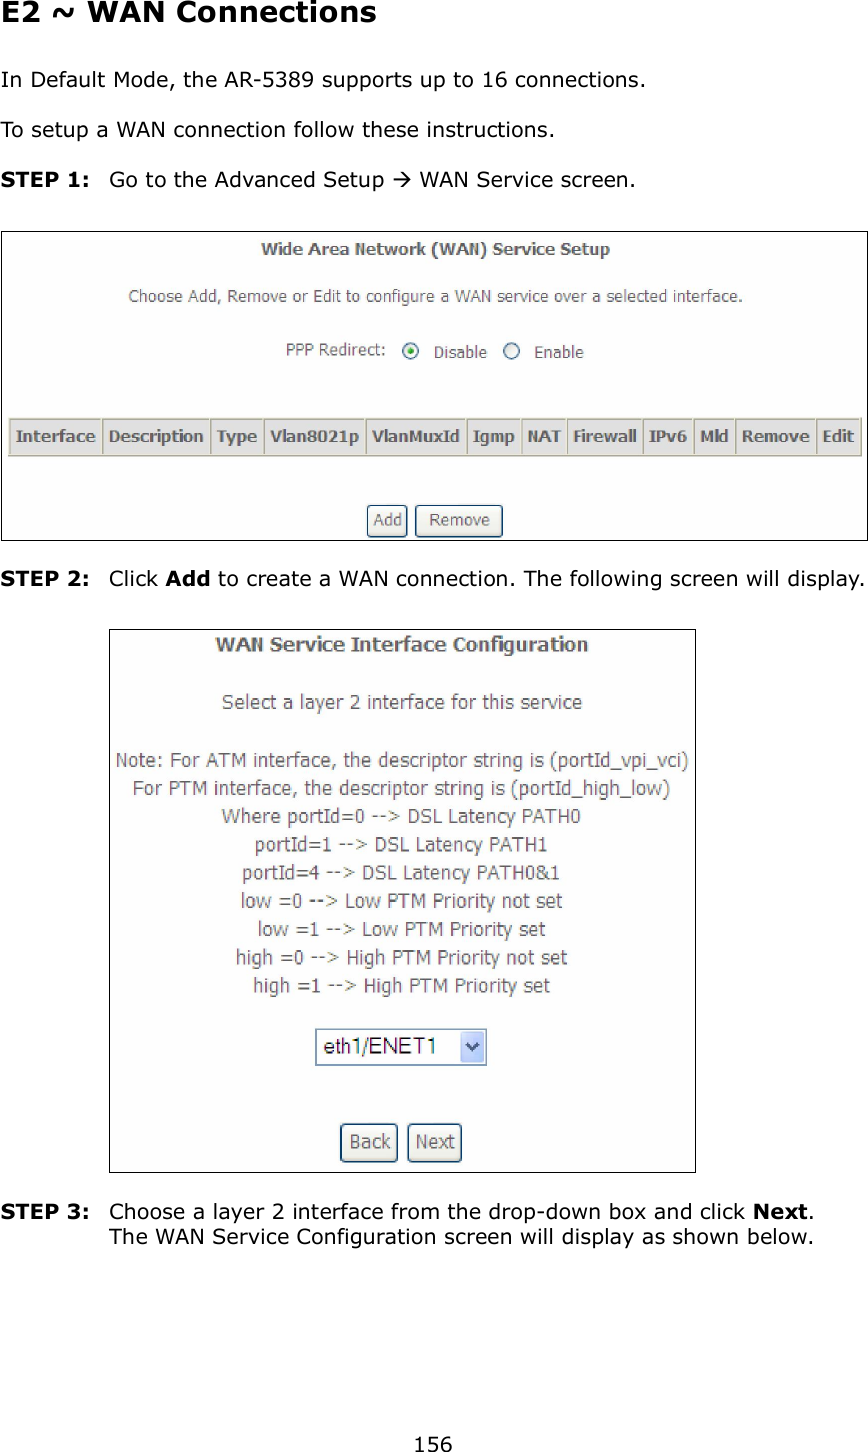  156 E2 ~ WAN Connections In Default Mode, the AR-5389 supports up to 16 connections.  To setup a WAN connection follow these instructions.  STEP 1:  Go to the Advanced Setup  WAN Service screen.   STEP 2:  Click Add to create a WAN connection. The following screen will display.     STEP 3:  Choose a layer 2 interface from the drop-down box and click Next.   The WAN Service Configuration screen will display as shown below.   